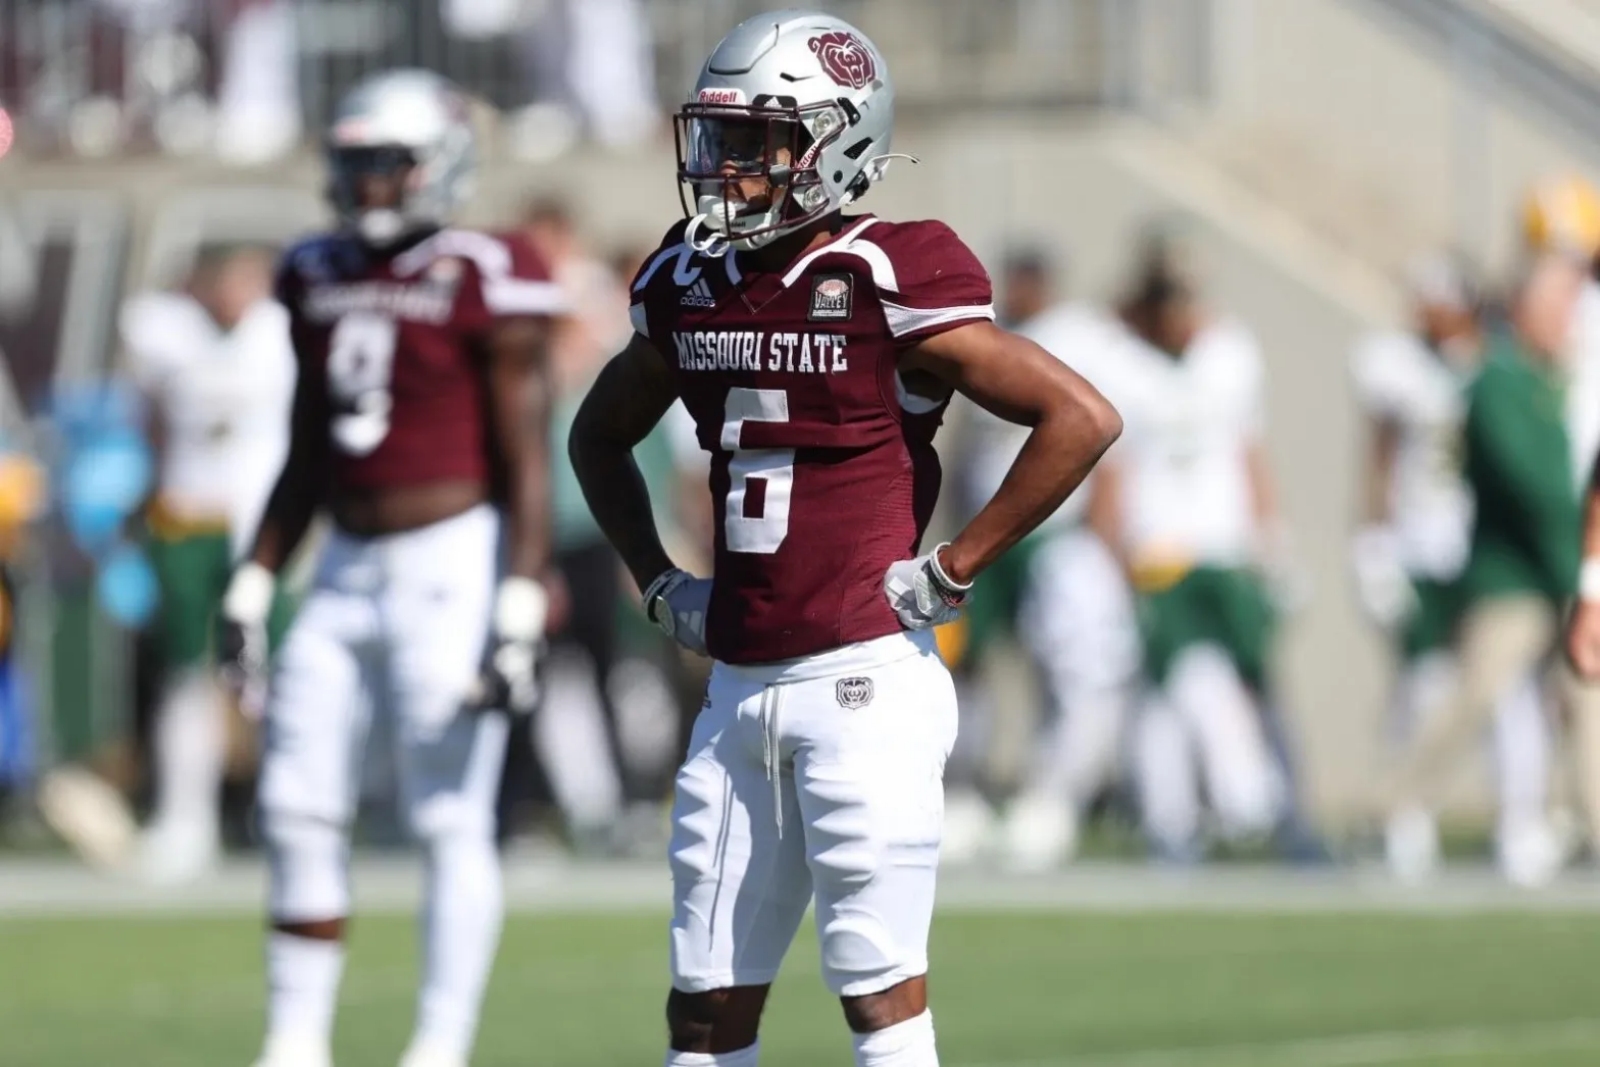 Raylen Sharpe, wearing a Missouri State football uniform, looks toward the sidelines during a game